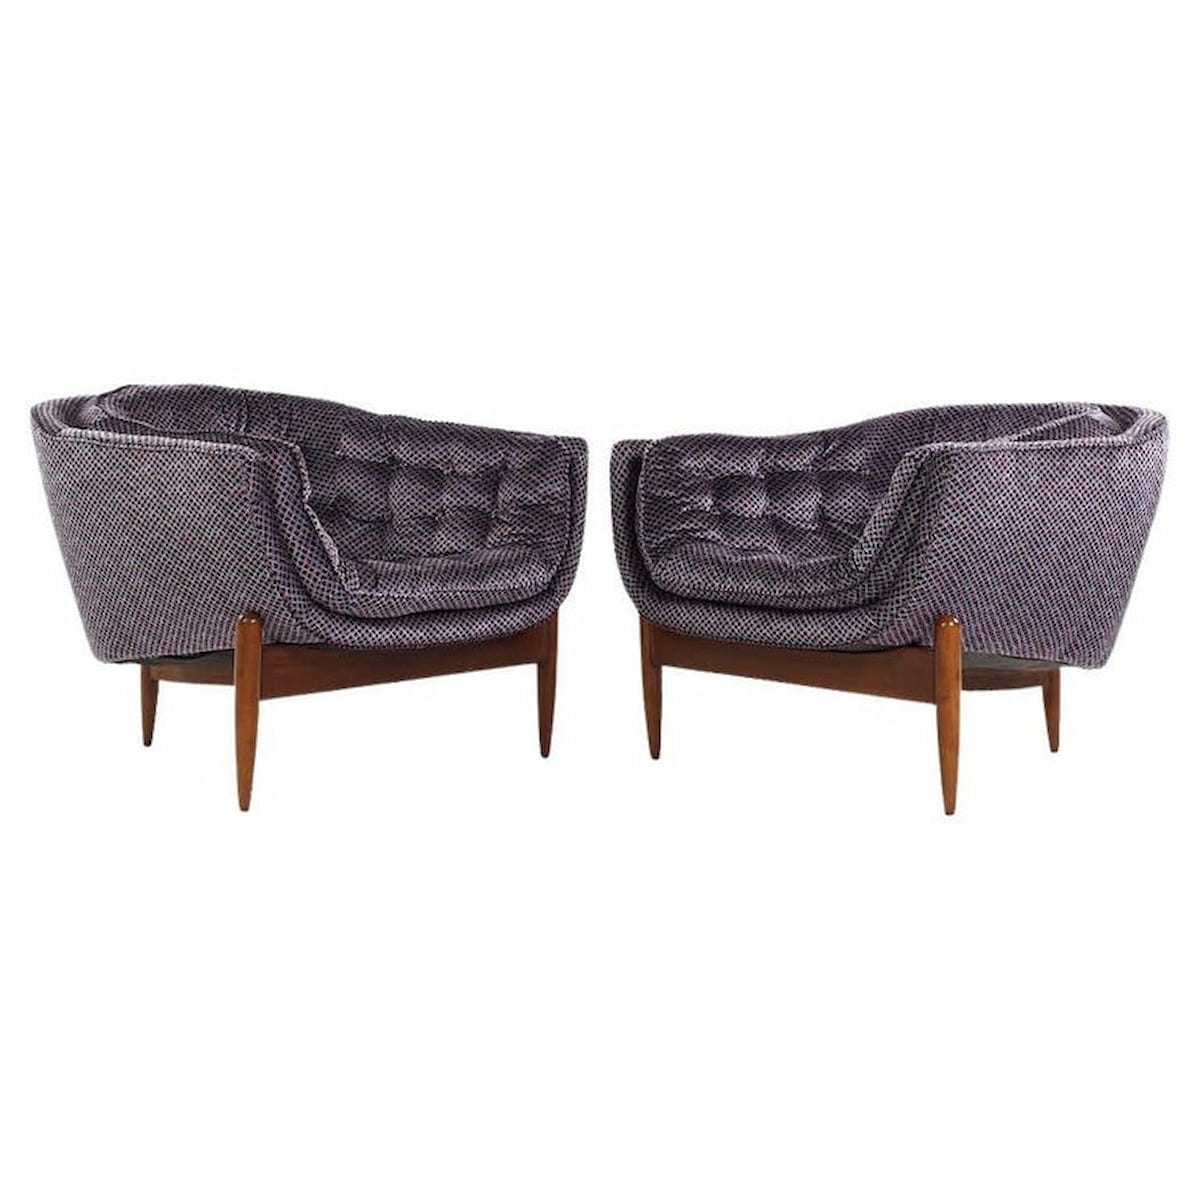 Adrian Pearsall for Craft Associates Mid Century Tufted Pearsall Chairs - Pair